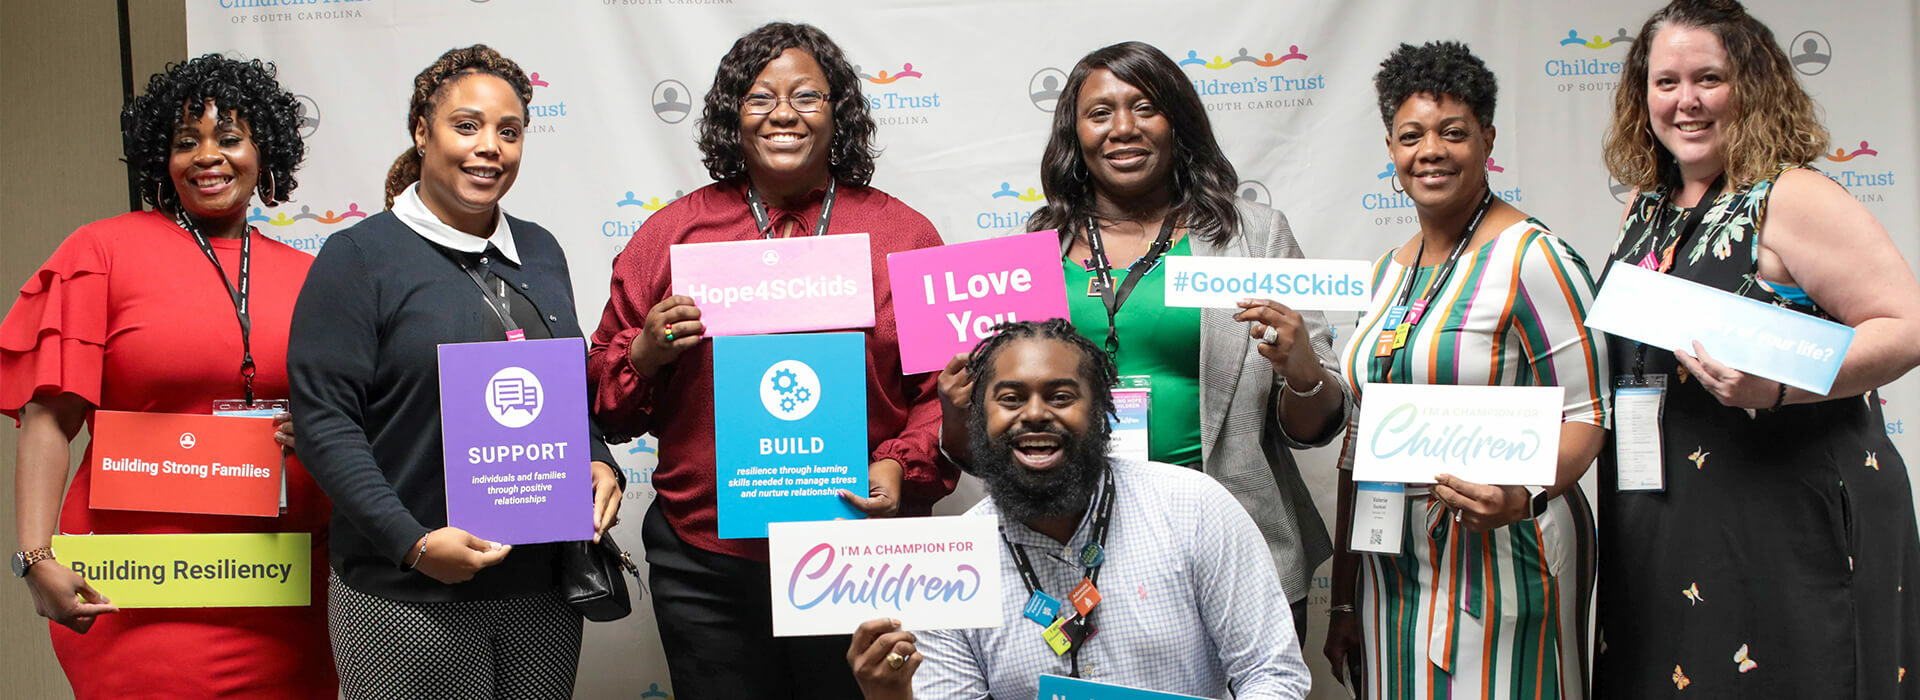 Building Hope for Children Conference attendees pose in front of a step and repeat banner holding signs with positive messages.